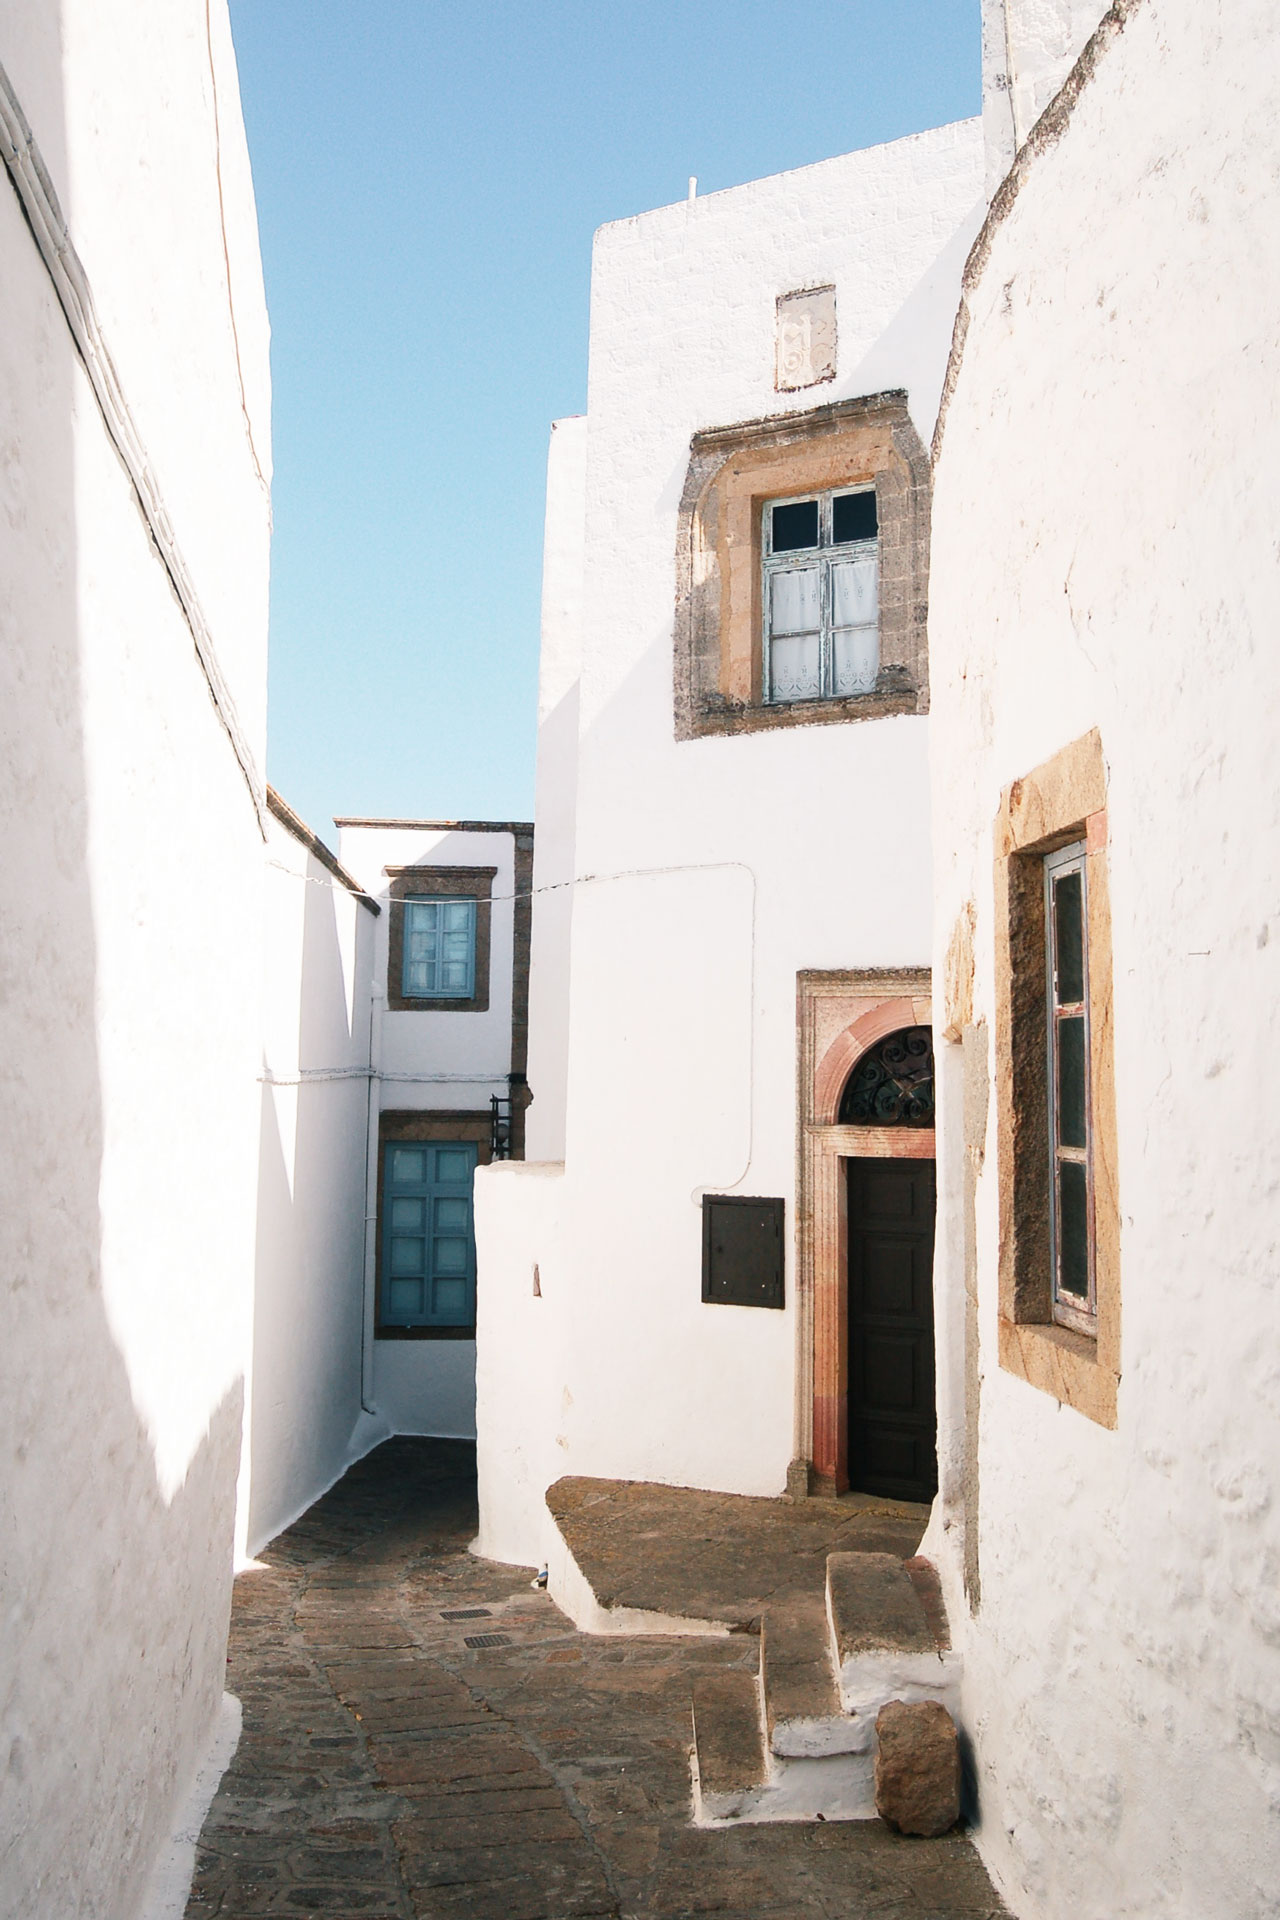 The labyrinthine streets of Hora with its impressive aristocratic homes